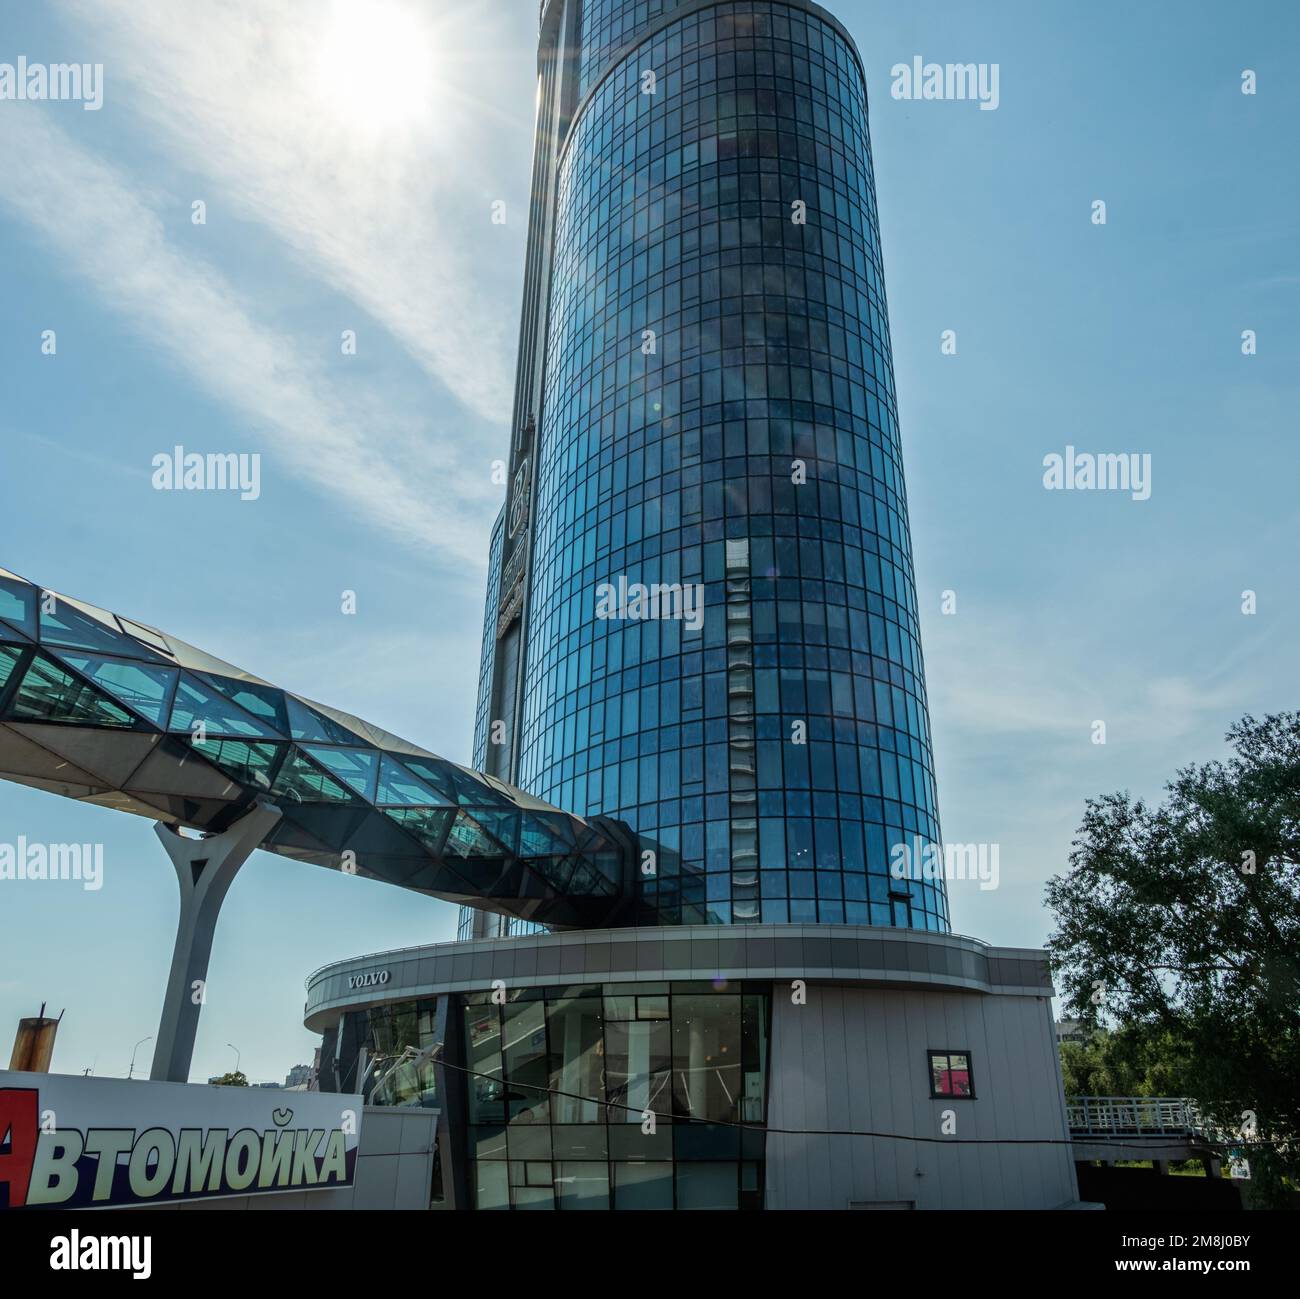 Chelyabinsk, Russia -July 24, 2022. A high-rise building with an overpass entering it against the background of the sky. Stock Photo